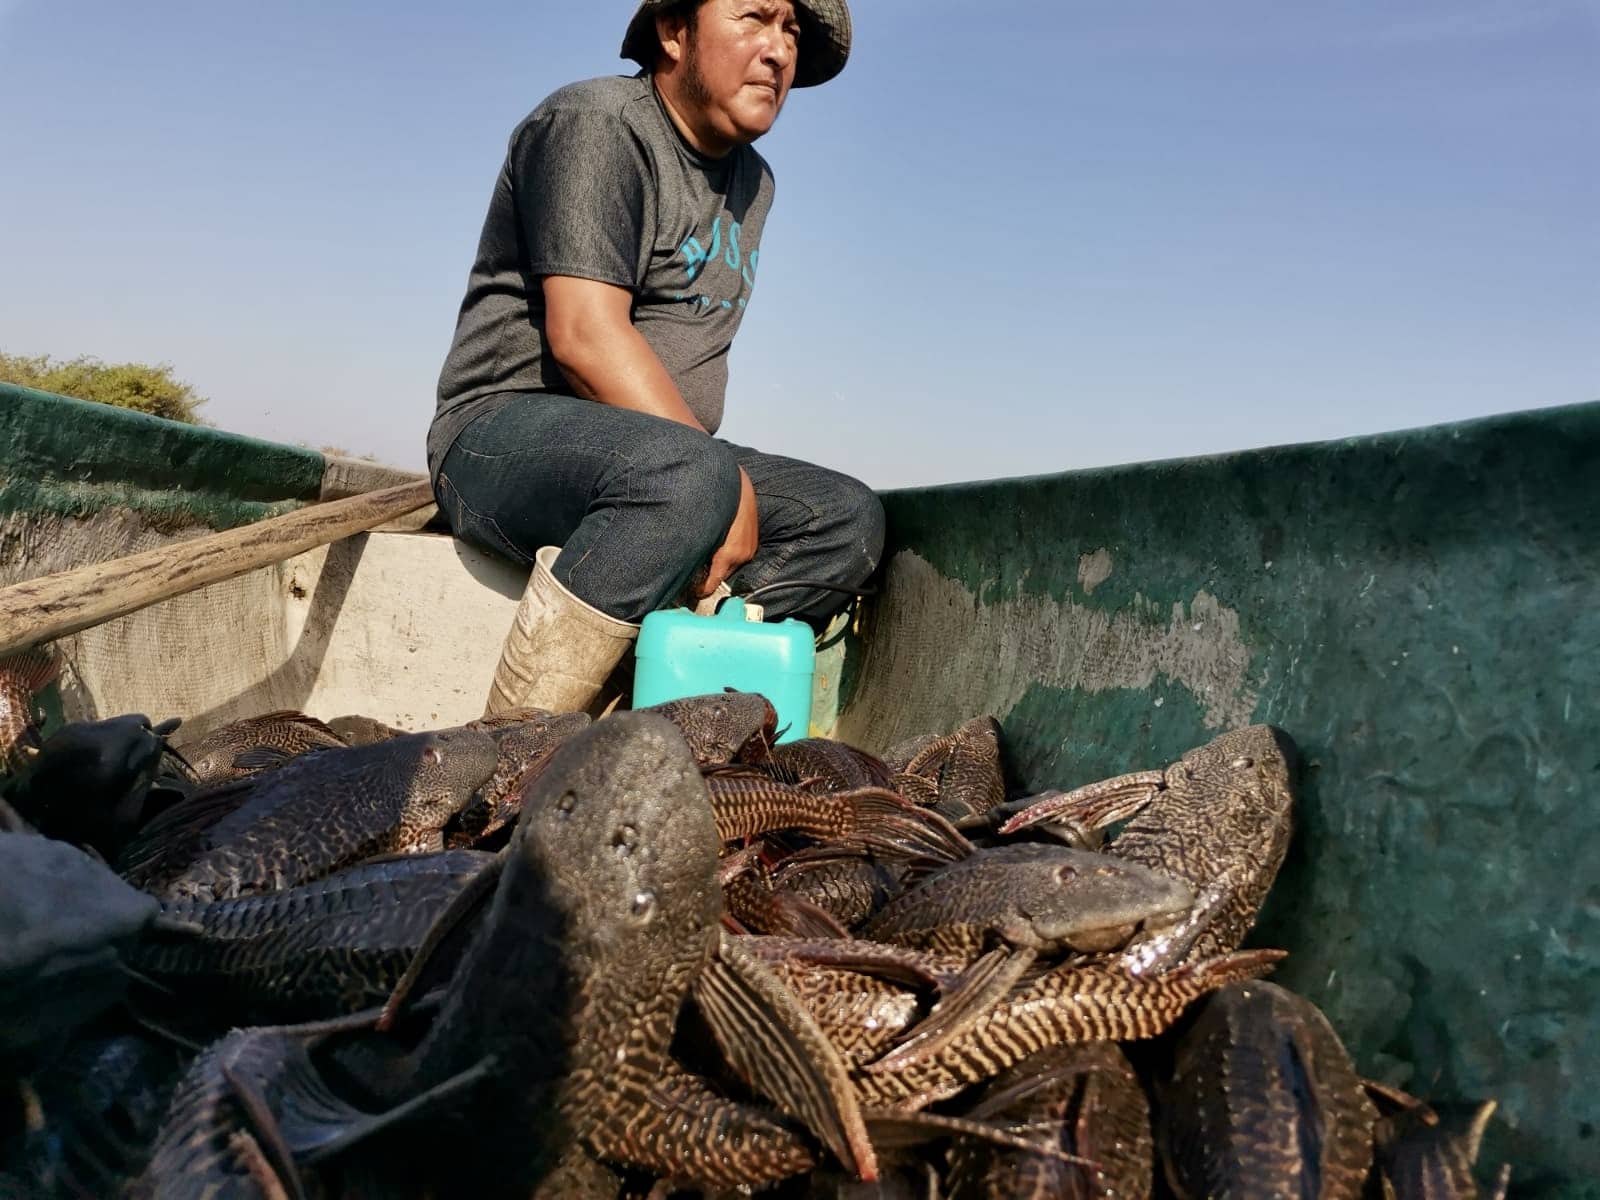 A fisherman returns with captured armoured catfish (also known as the Mexican devil fish or pez diablo). Photo: Sara Escobar, Tortugas al Viento.